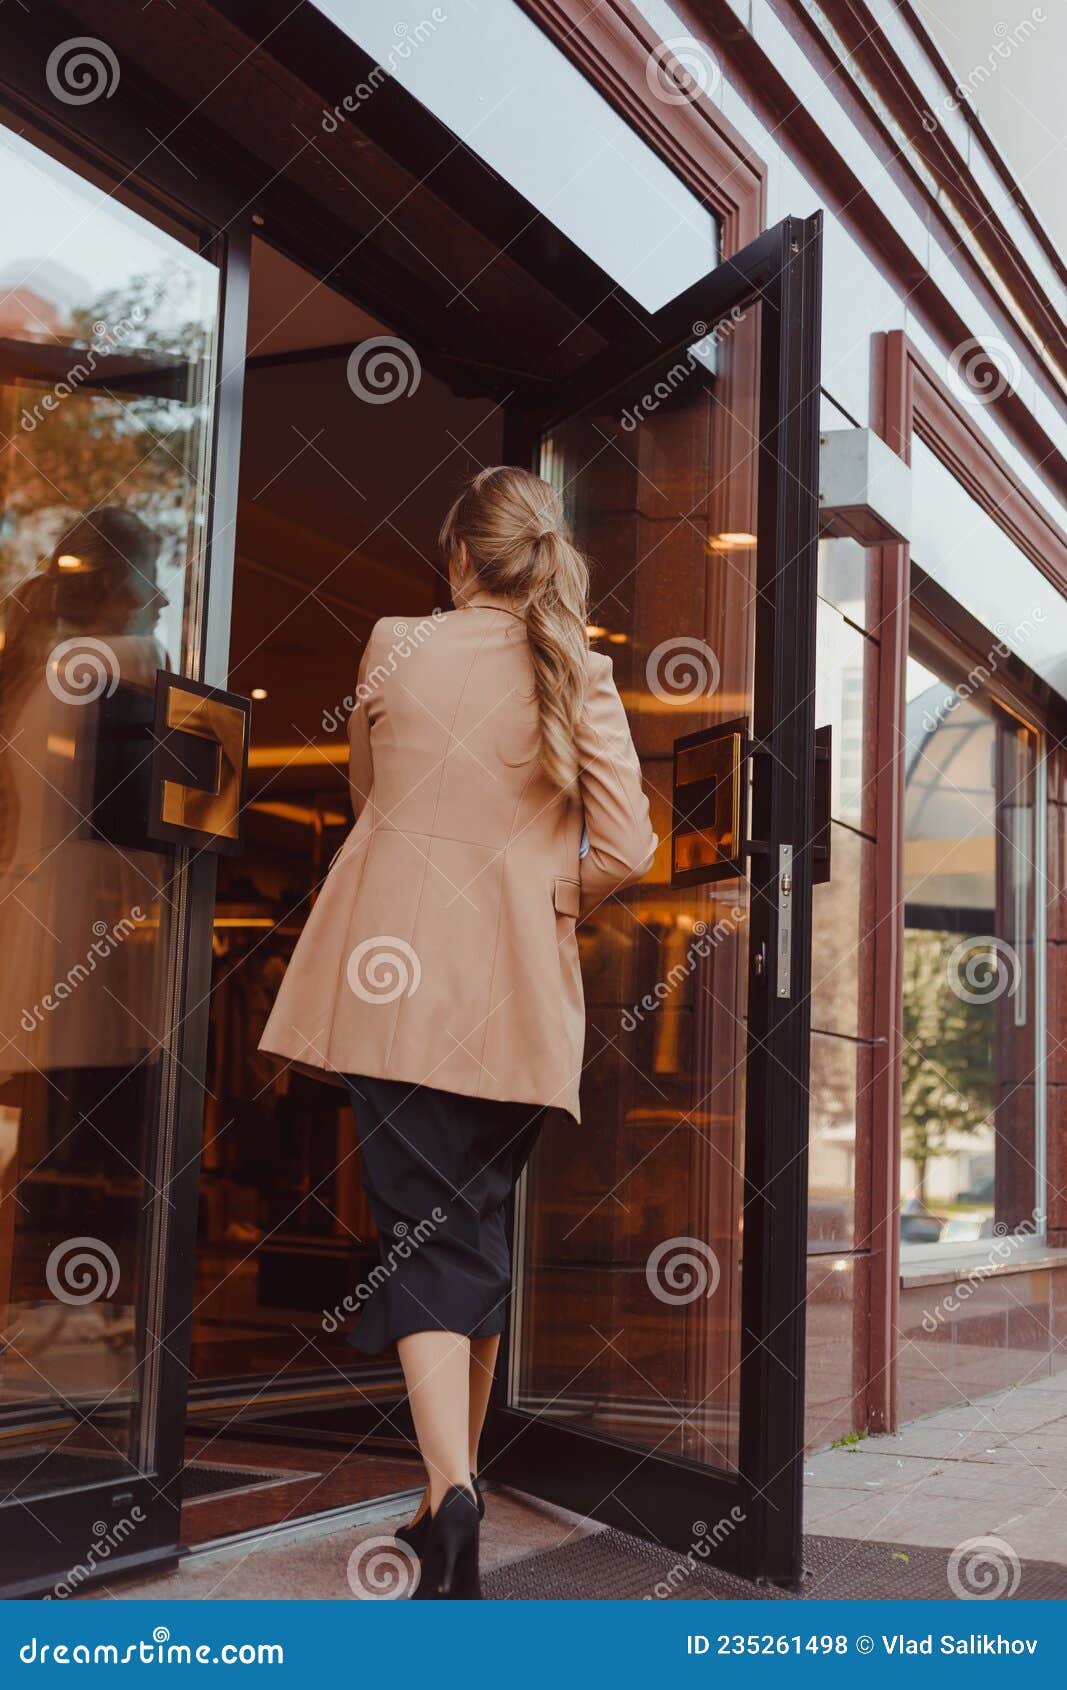 Young Elegant Dressed Woman Entering the Building Stock Photo - Image ...